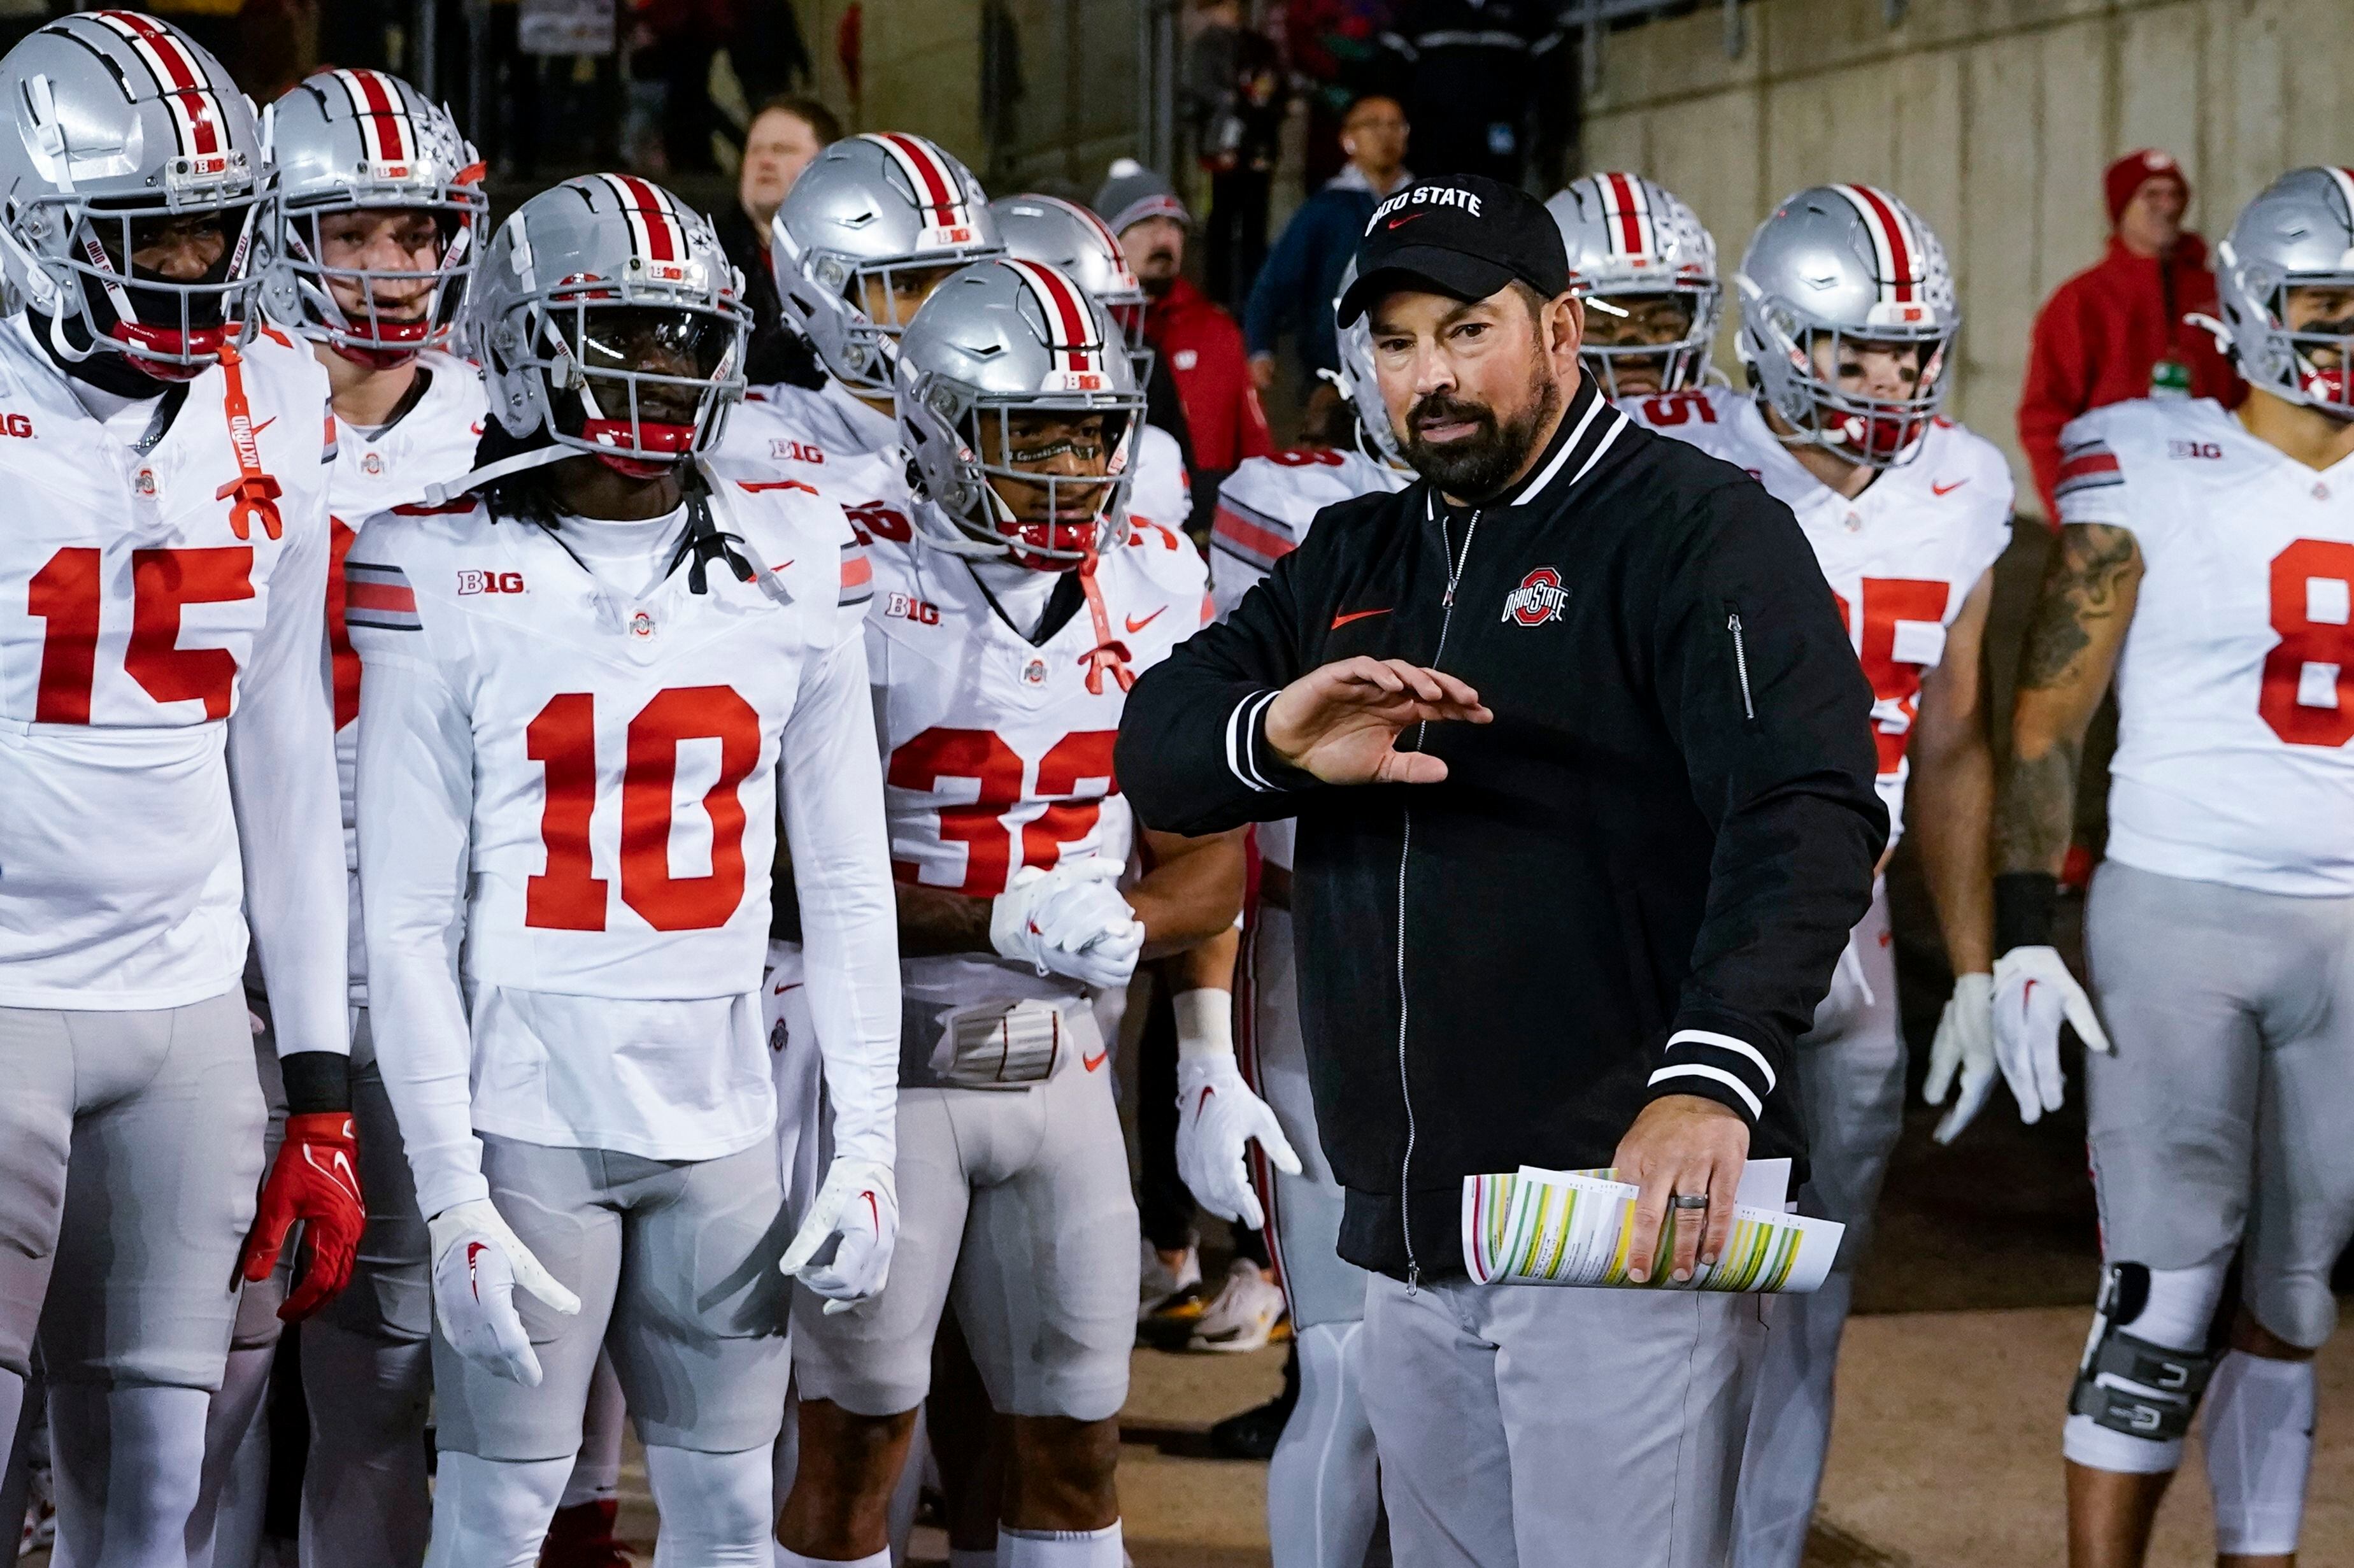 Harrison, Henderson lead unbeaten and No. 3-ranked Ohio State to